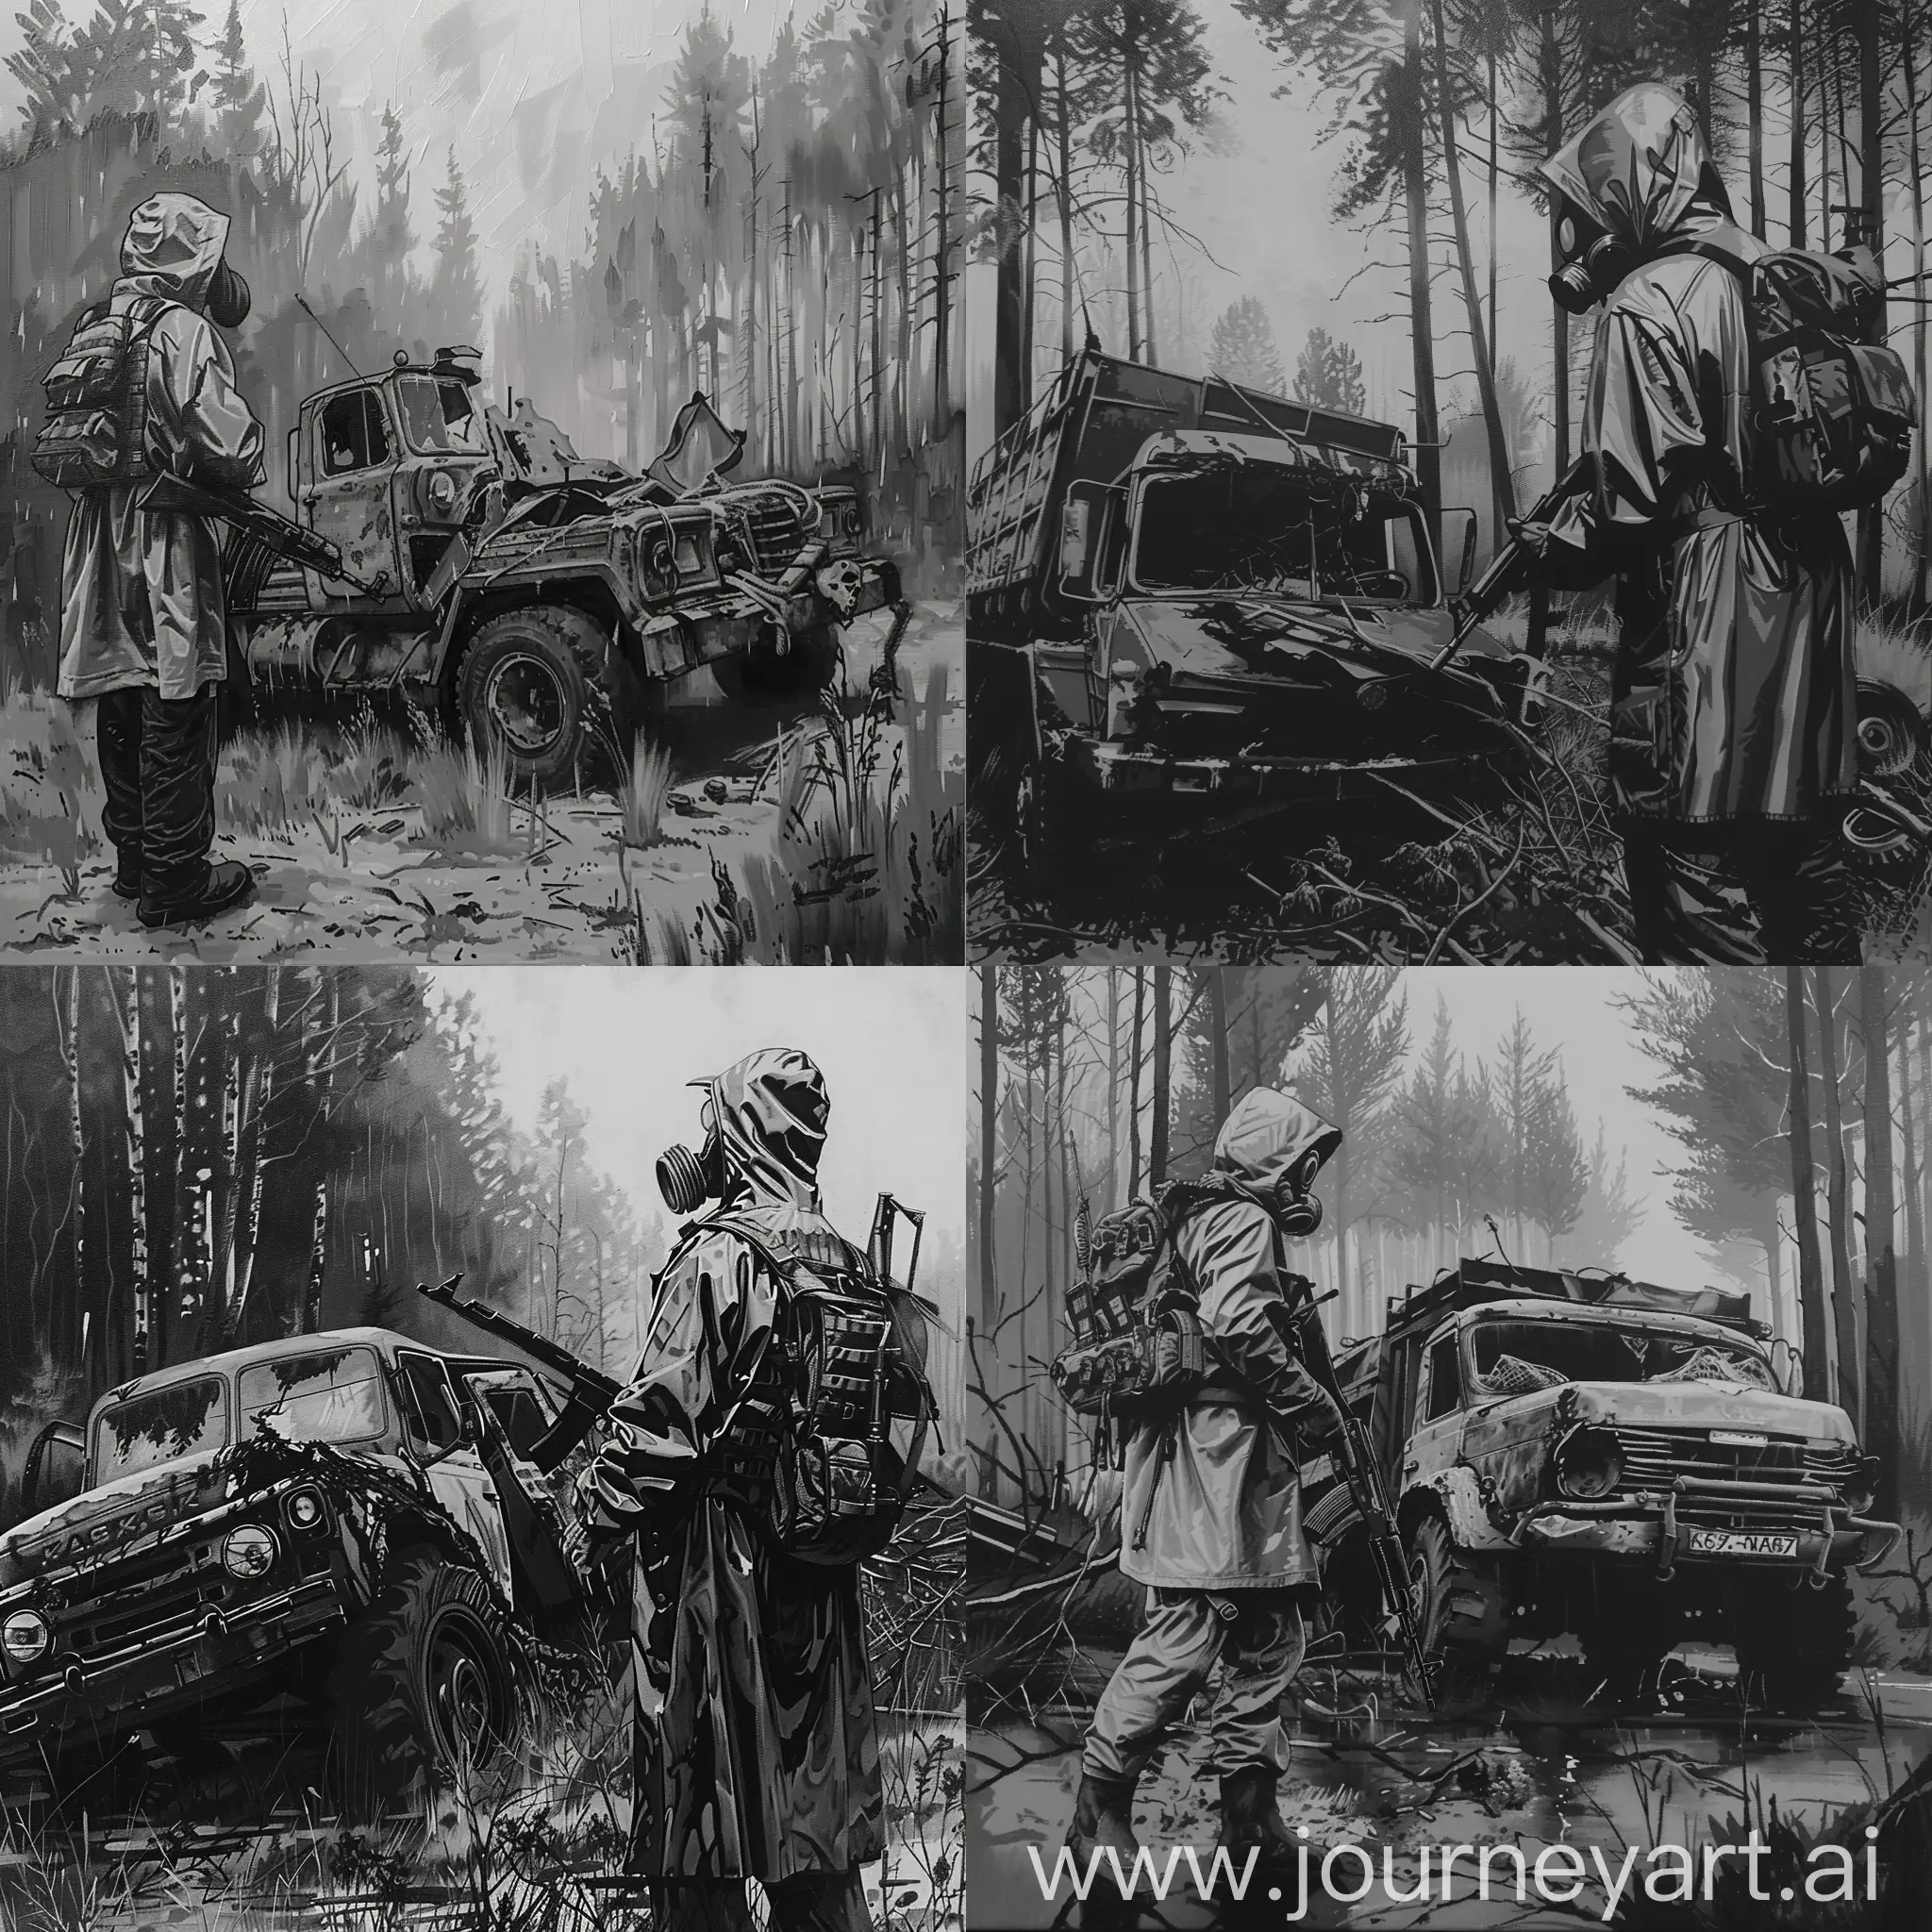 Black and white style, oil painting, stalker in a raincoat, military bulletproof vest and unloading on the raincoat, gas mask, AK-47 in his hands, a small backpack on his back, stalker stands in the middle of the radioactive Chernobyl forest next to an overturned and completely destroyed Soviet Kamaz truck.